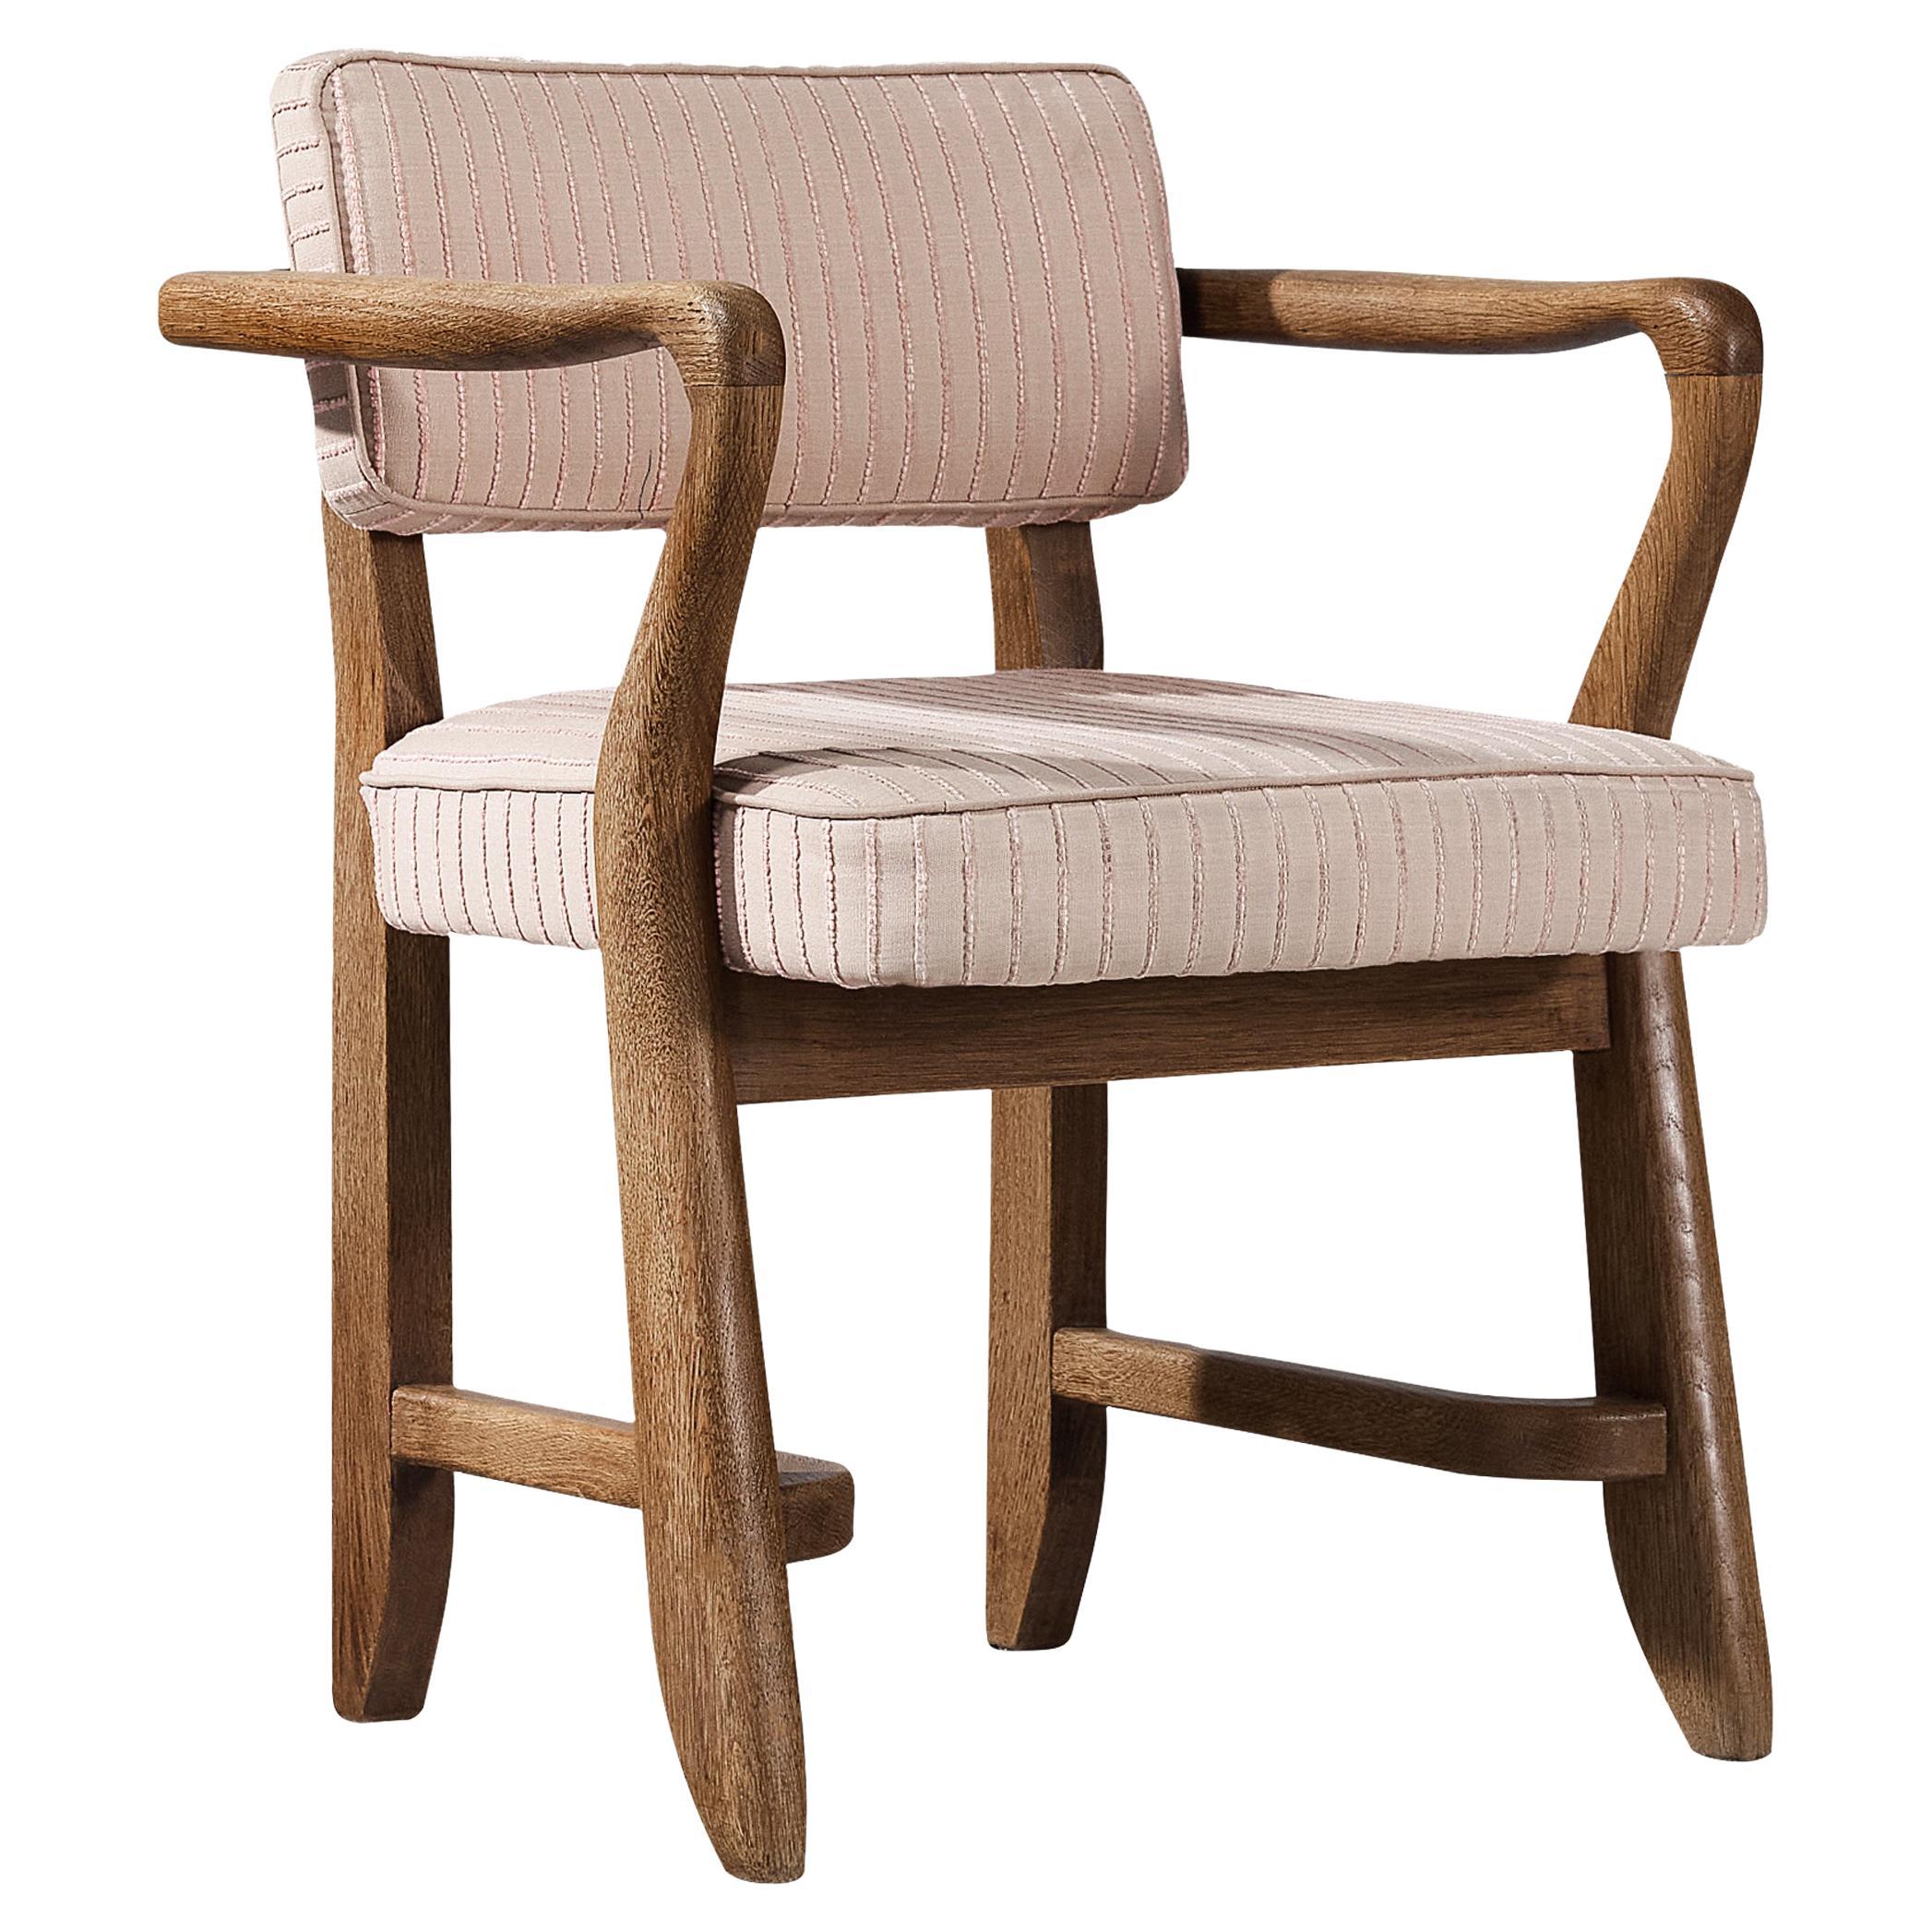 Guillerme & Chambron 'Denis' Armchair in Oak and Soft Pink Upholstery